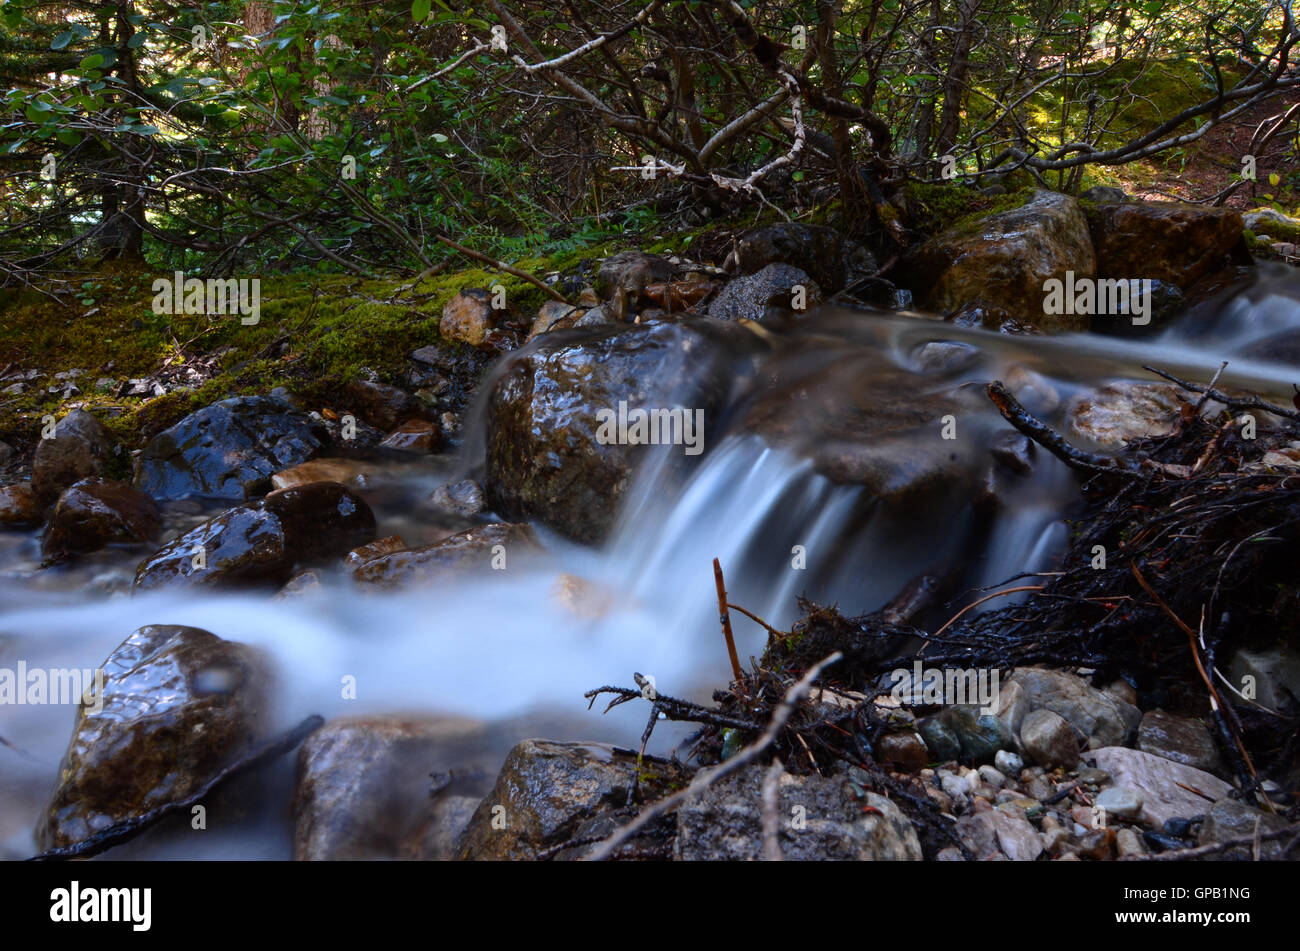 Stream and smooth flowing waterfall in the mountains Stock Photo